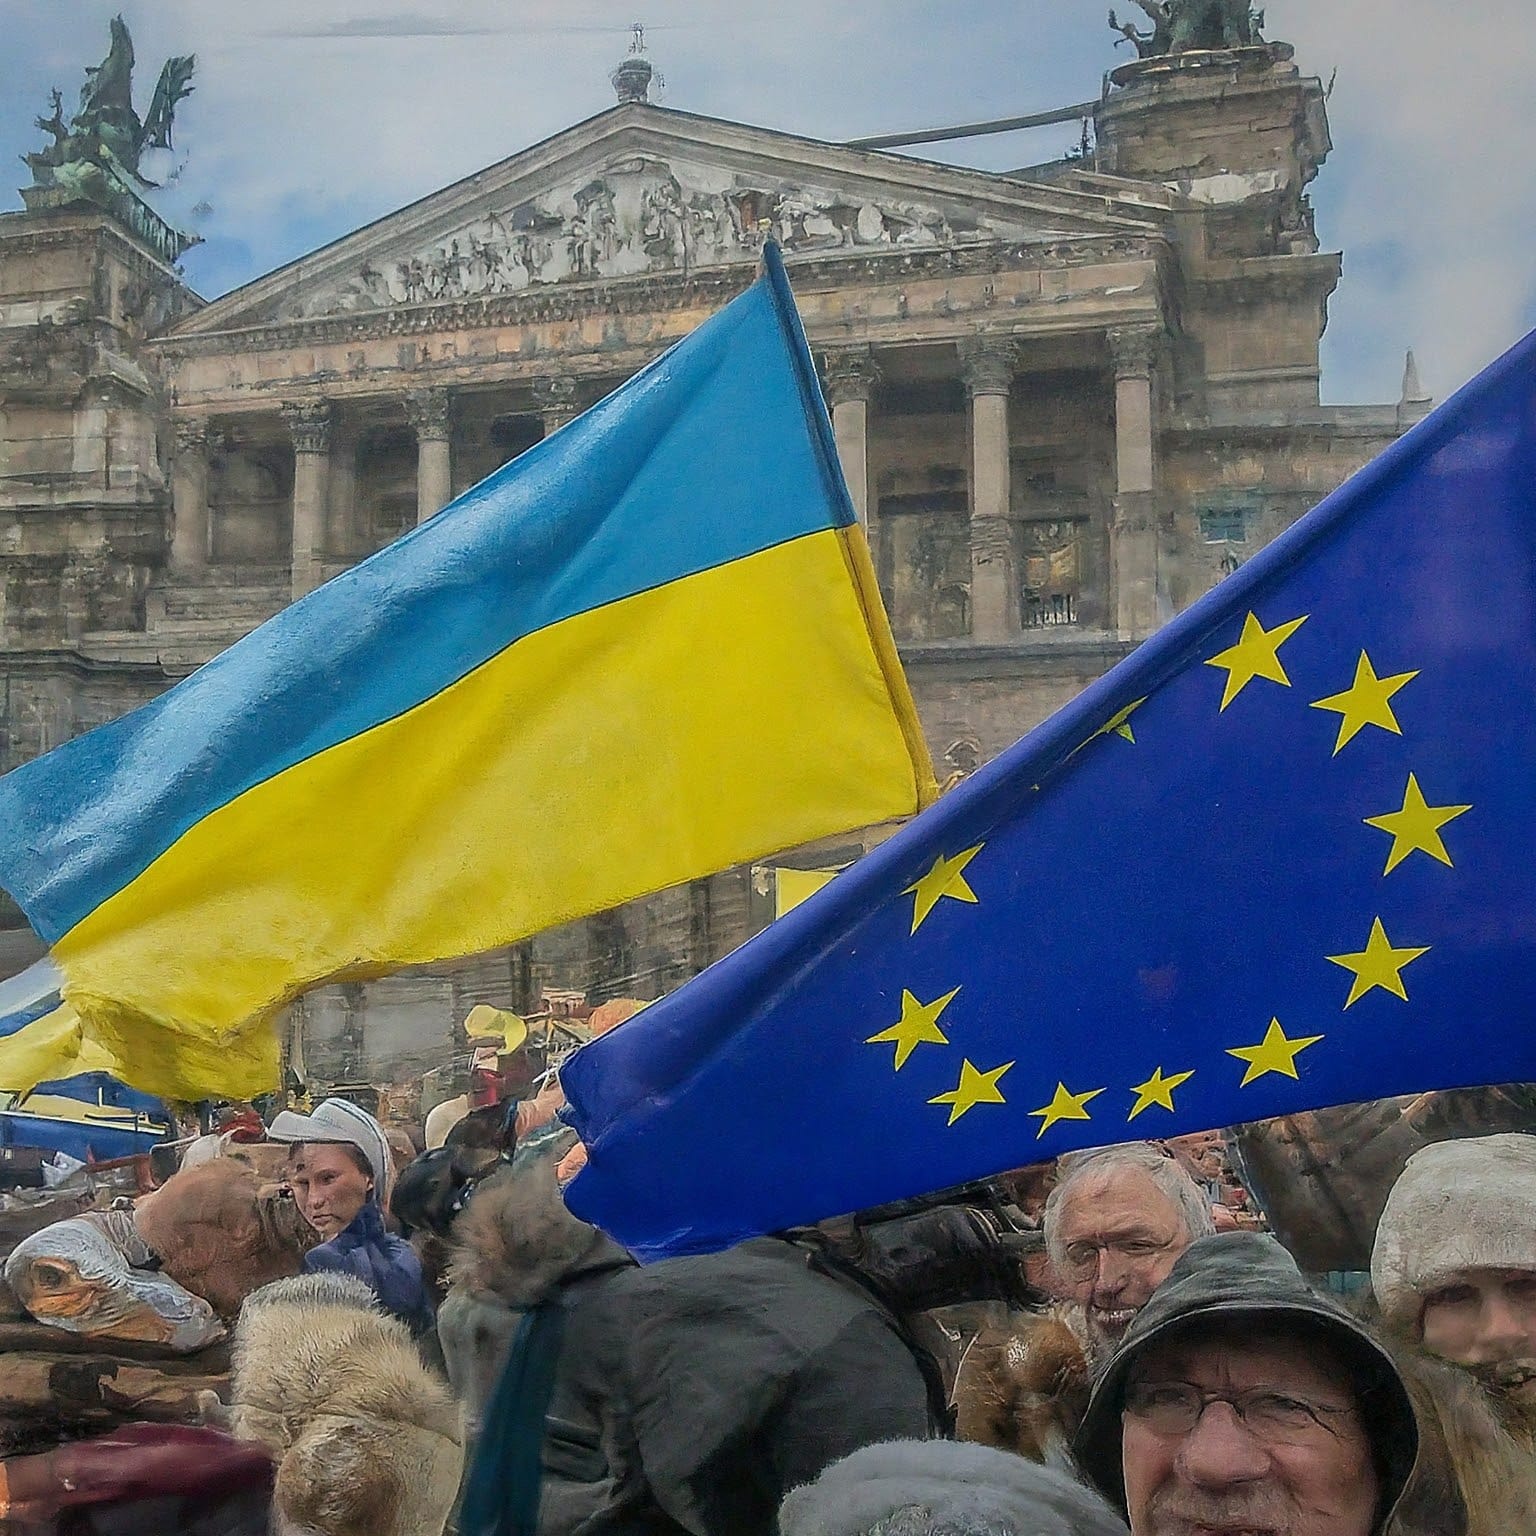 The European Union has launched membership talks with Ukraine